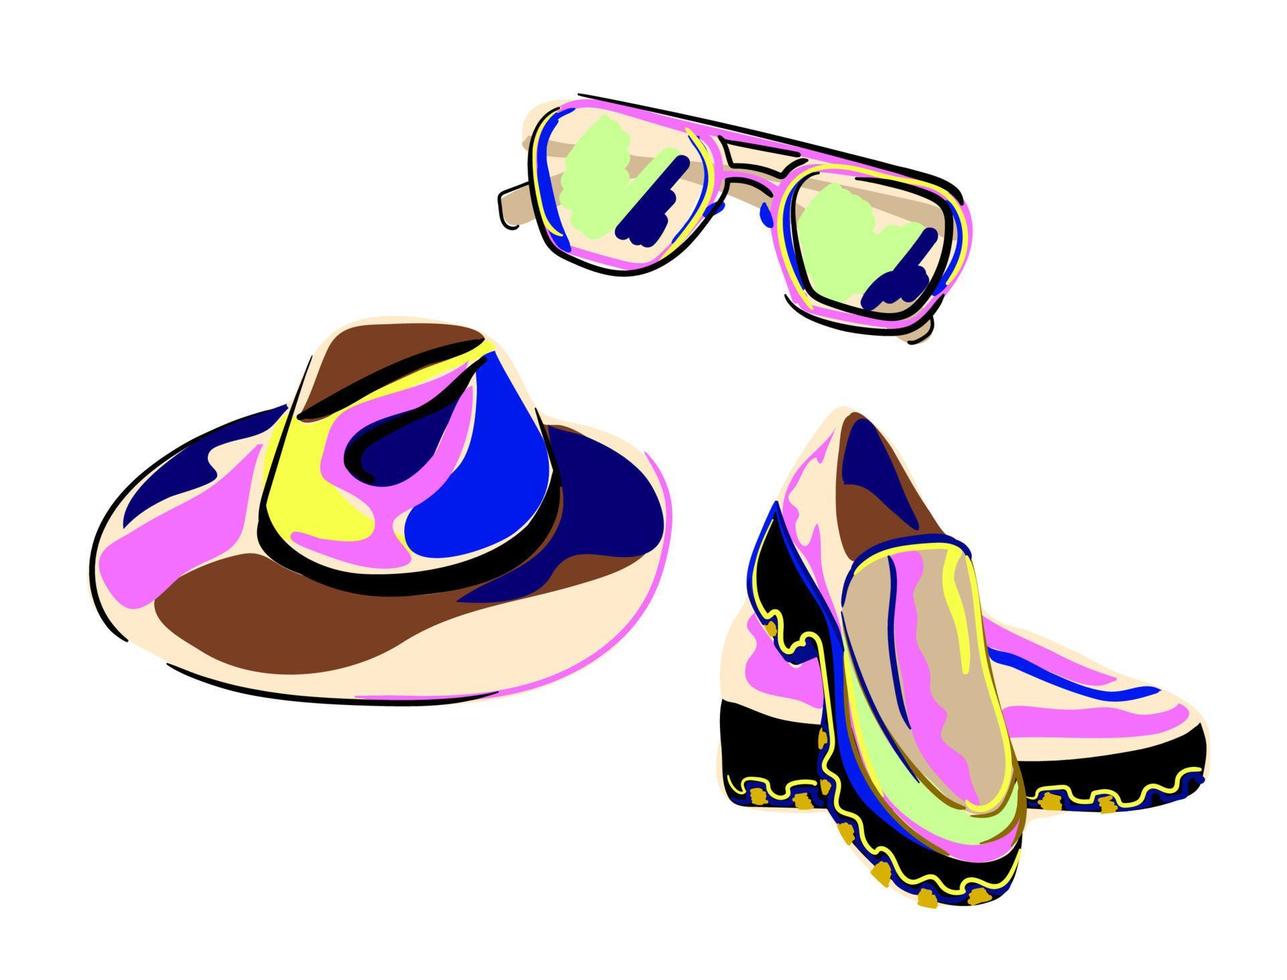 Psychedelic, comic groovy elements. Shoes, hat and glasses. Vector illustration.